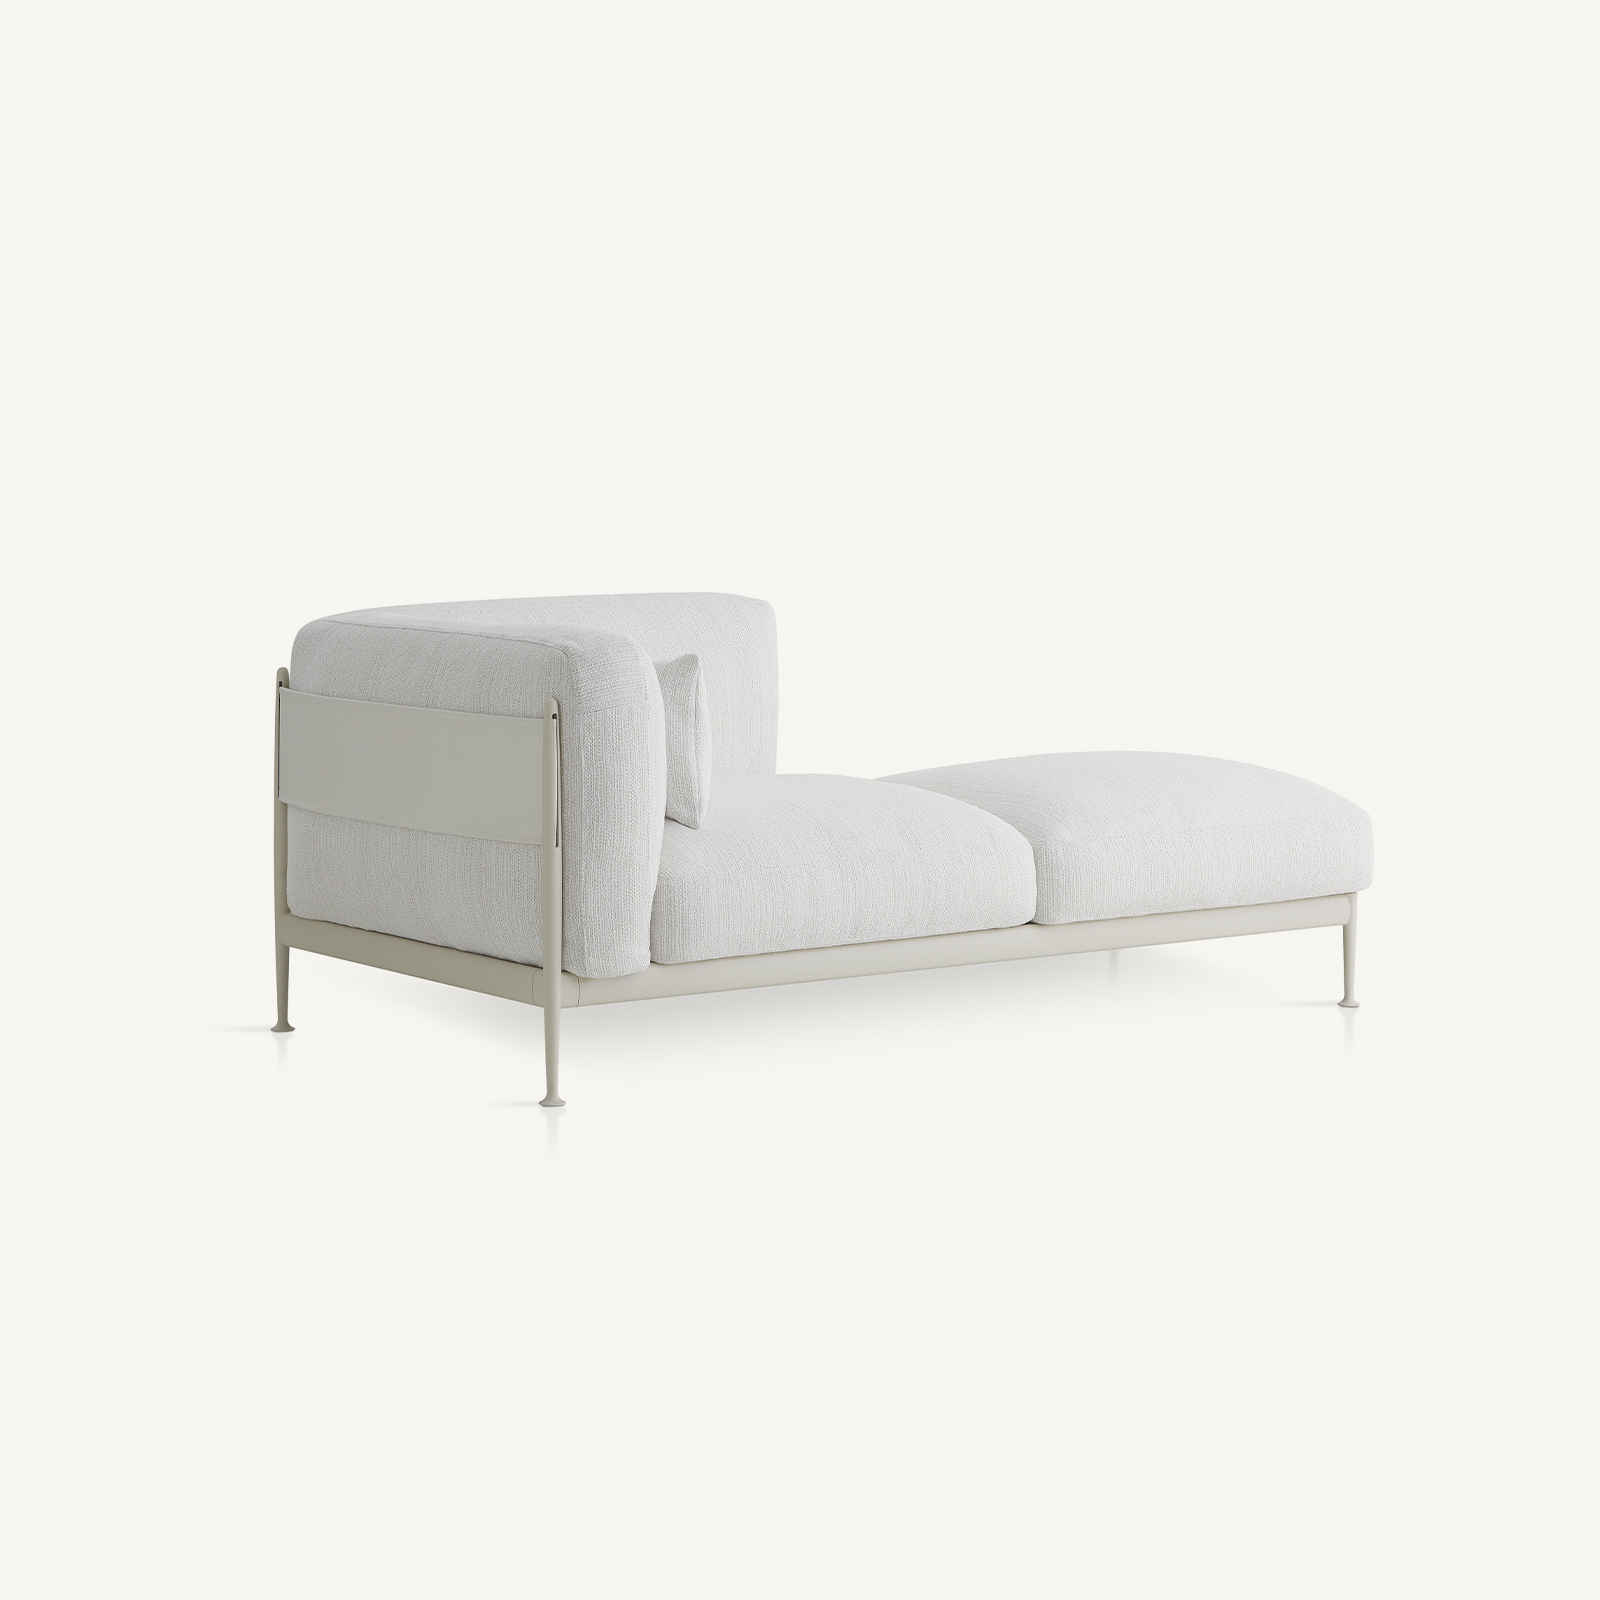 outdoor collection - sofas - obi right chaise longue module